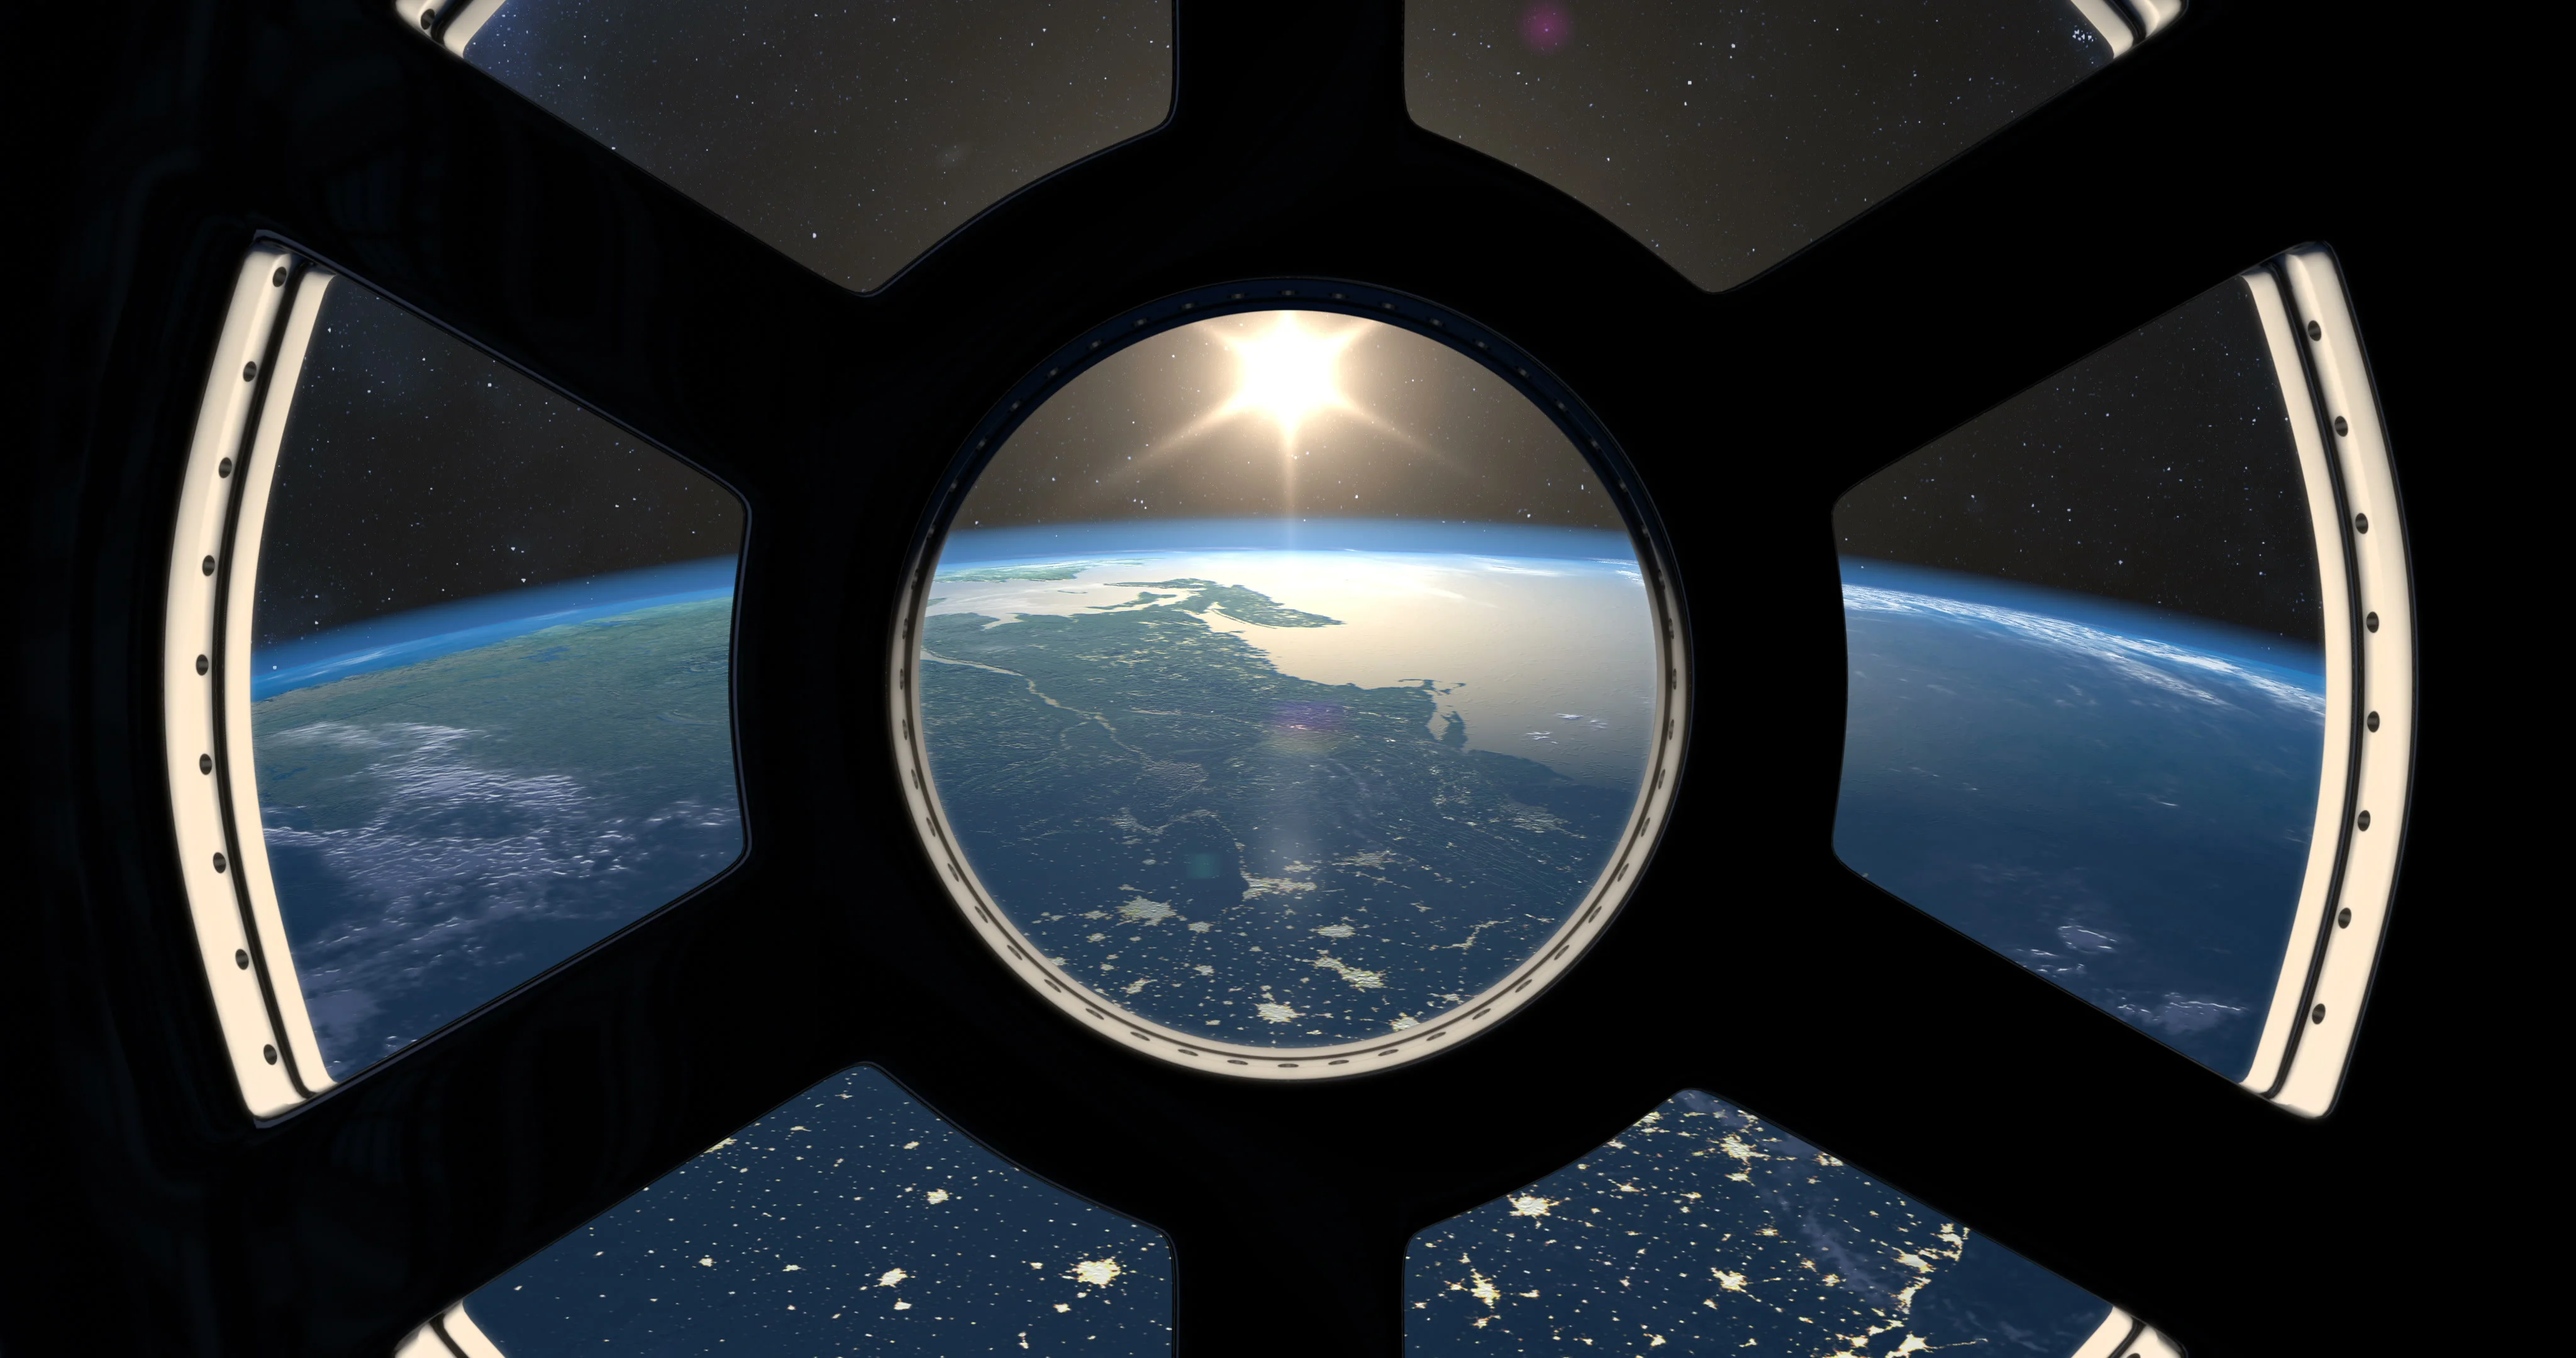 the sunrises from space station